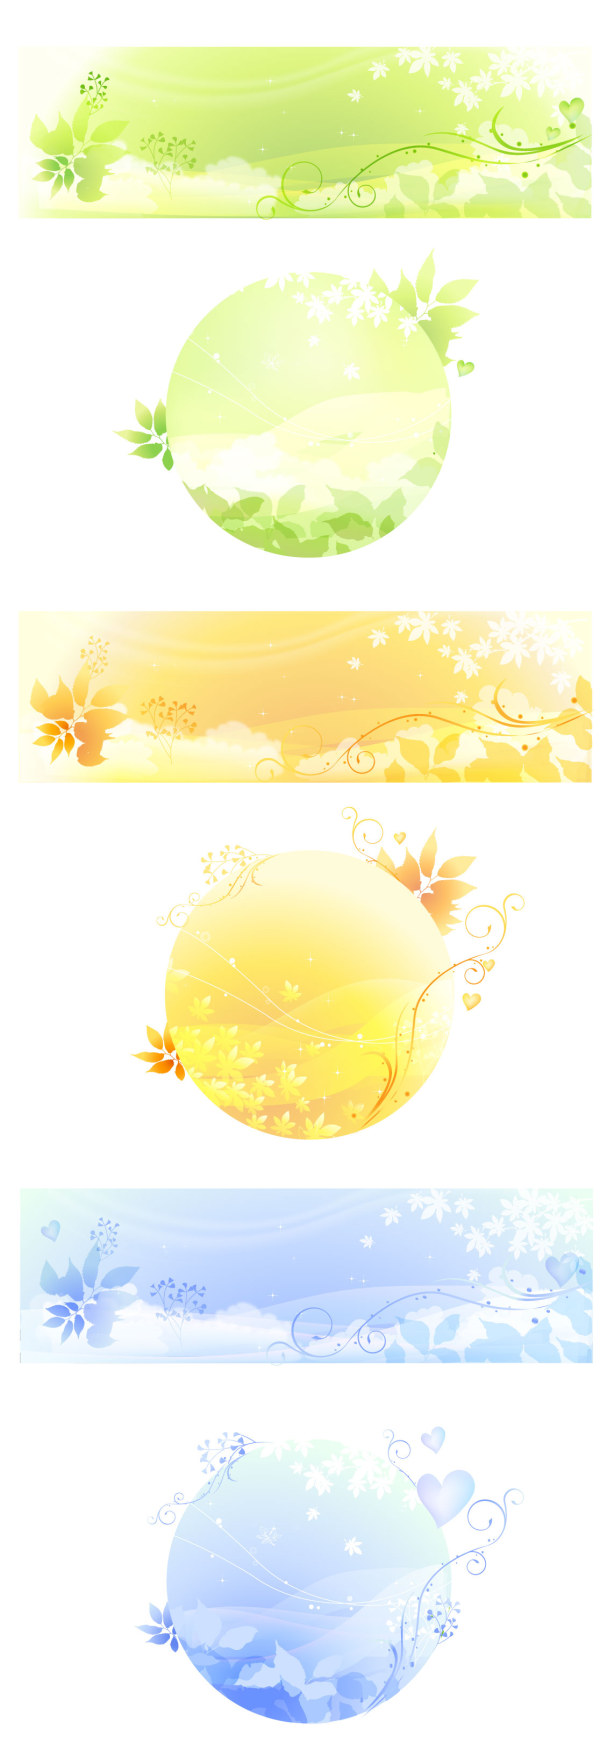 Rattan spring, autumn leaves, background vector material